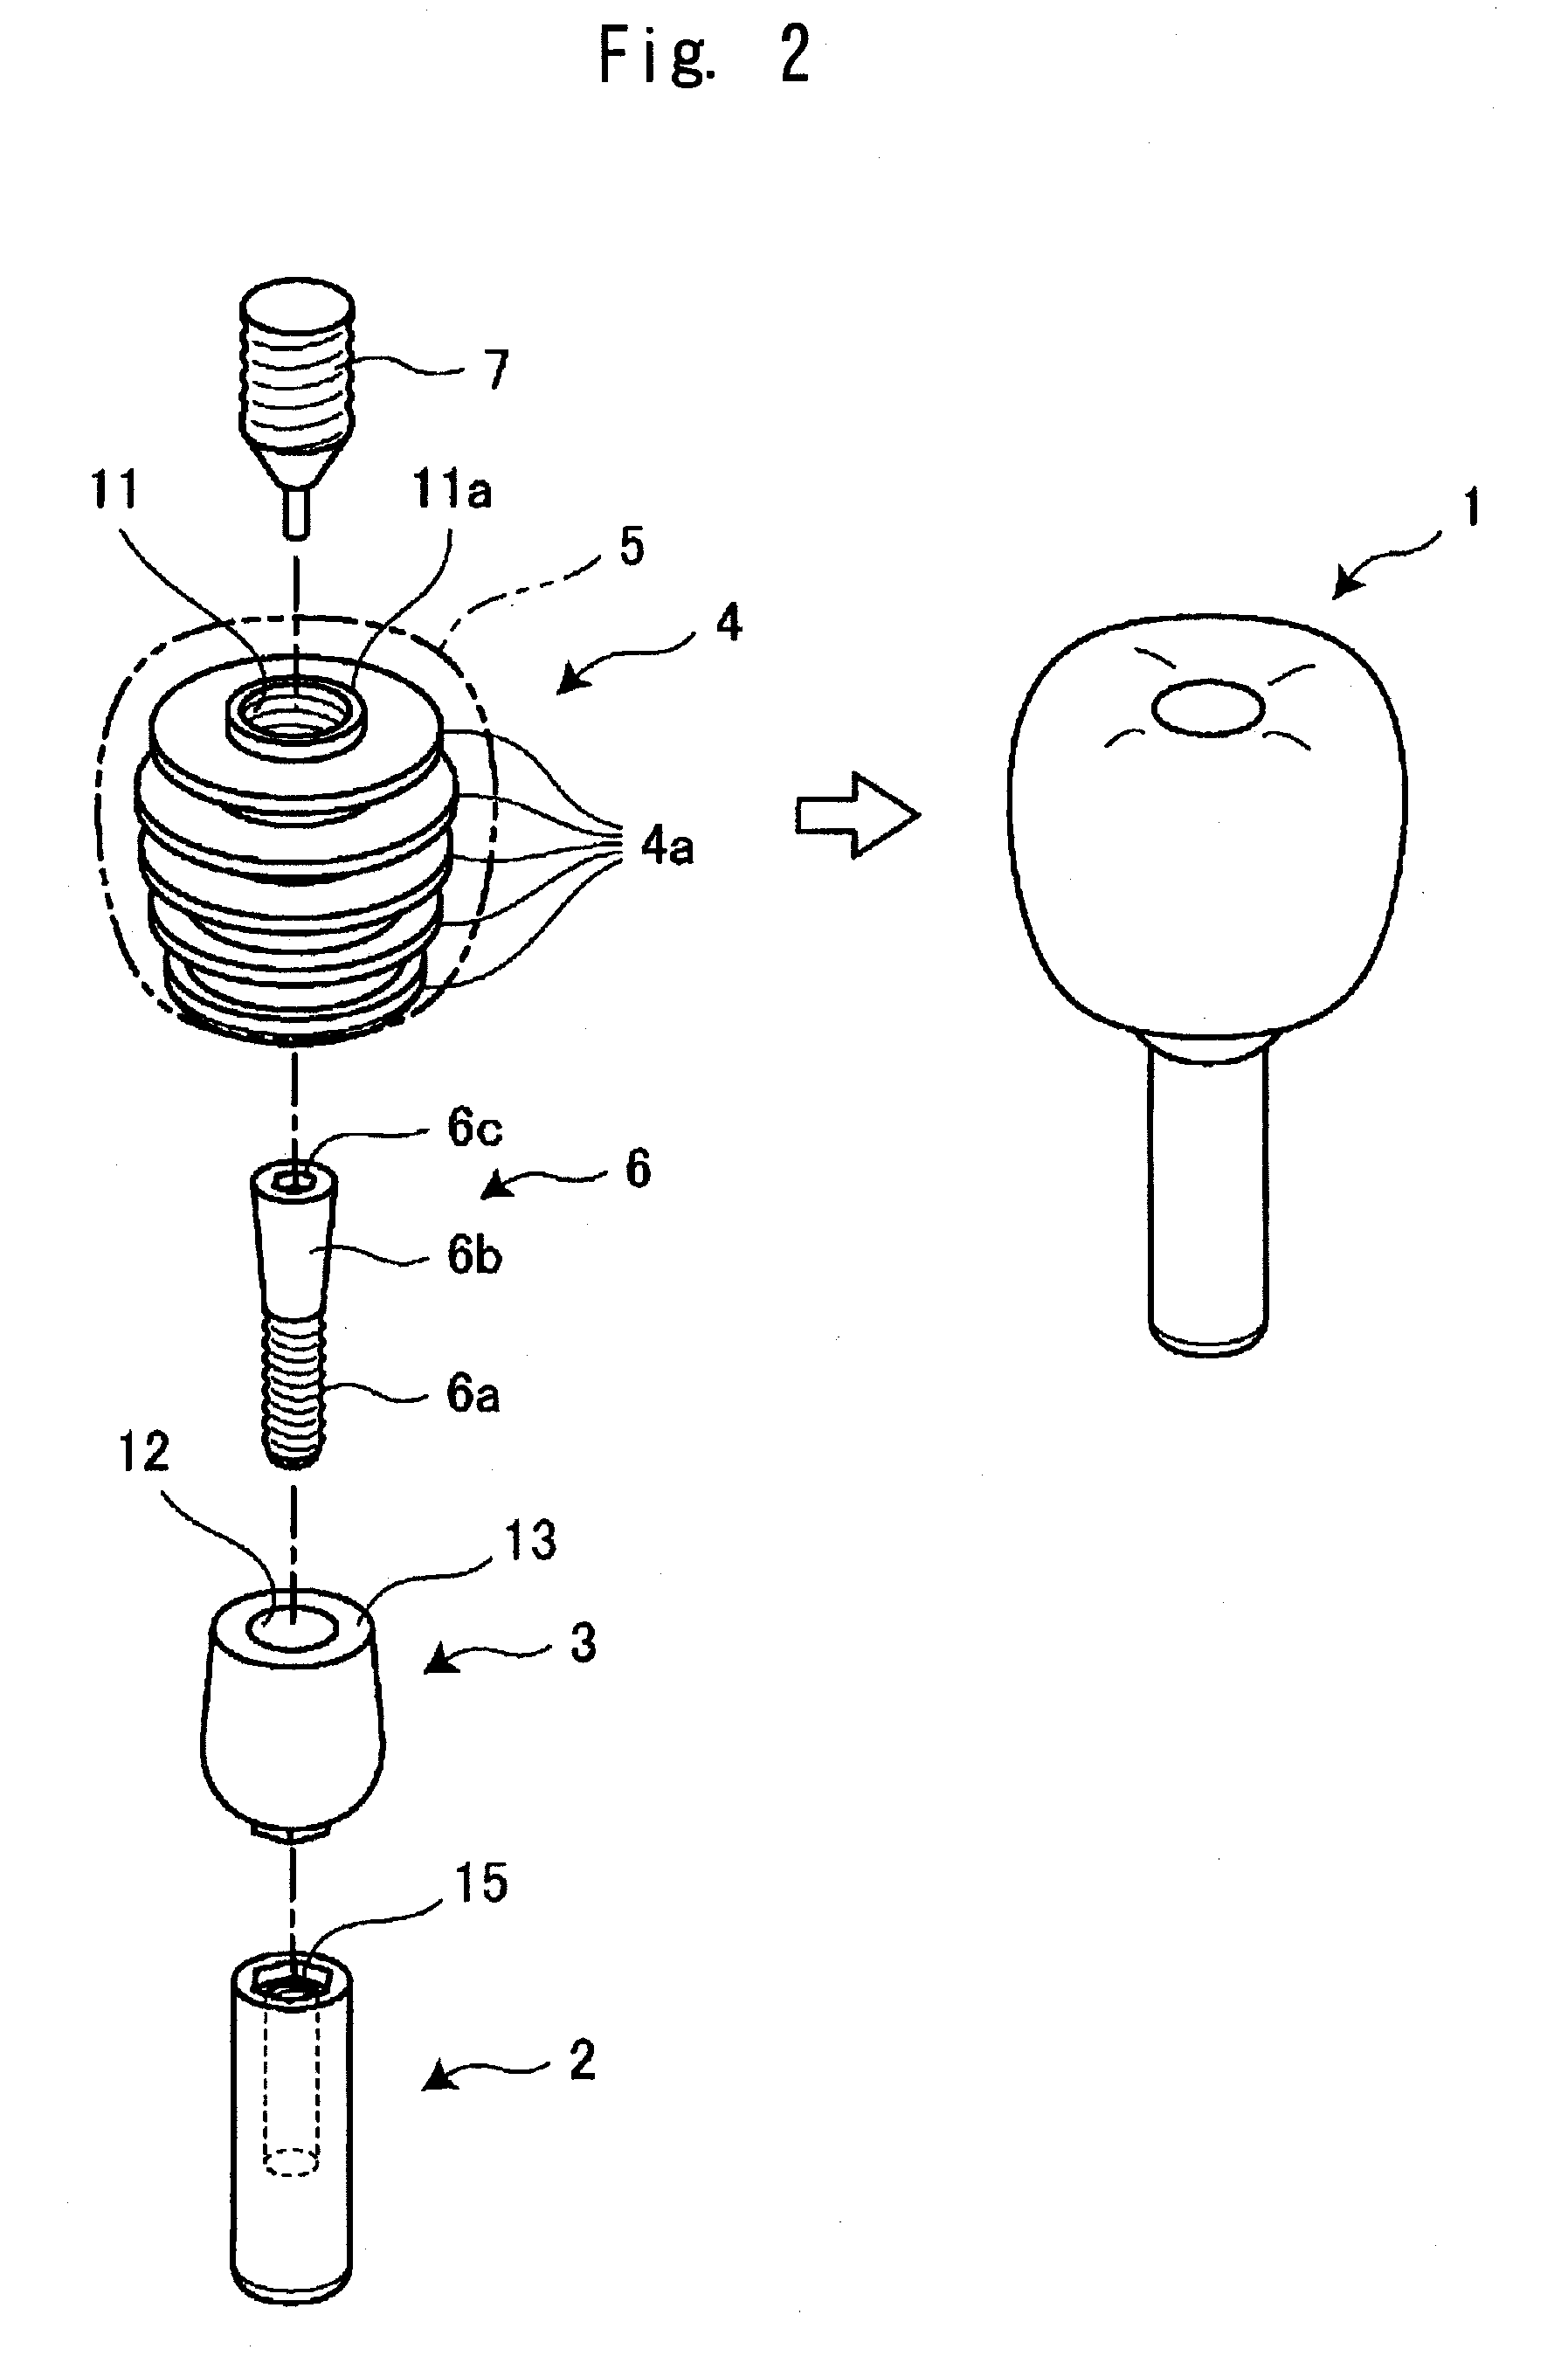 Human body implant structure, method of assembling the structure and method of disassembling the structure